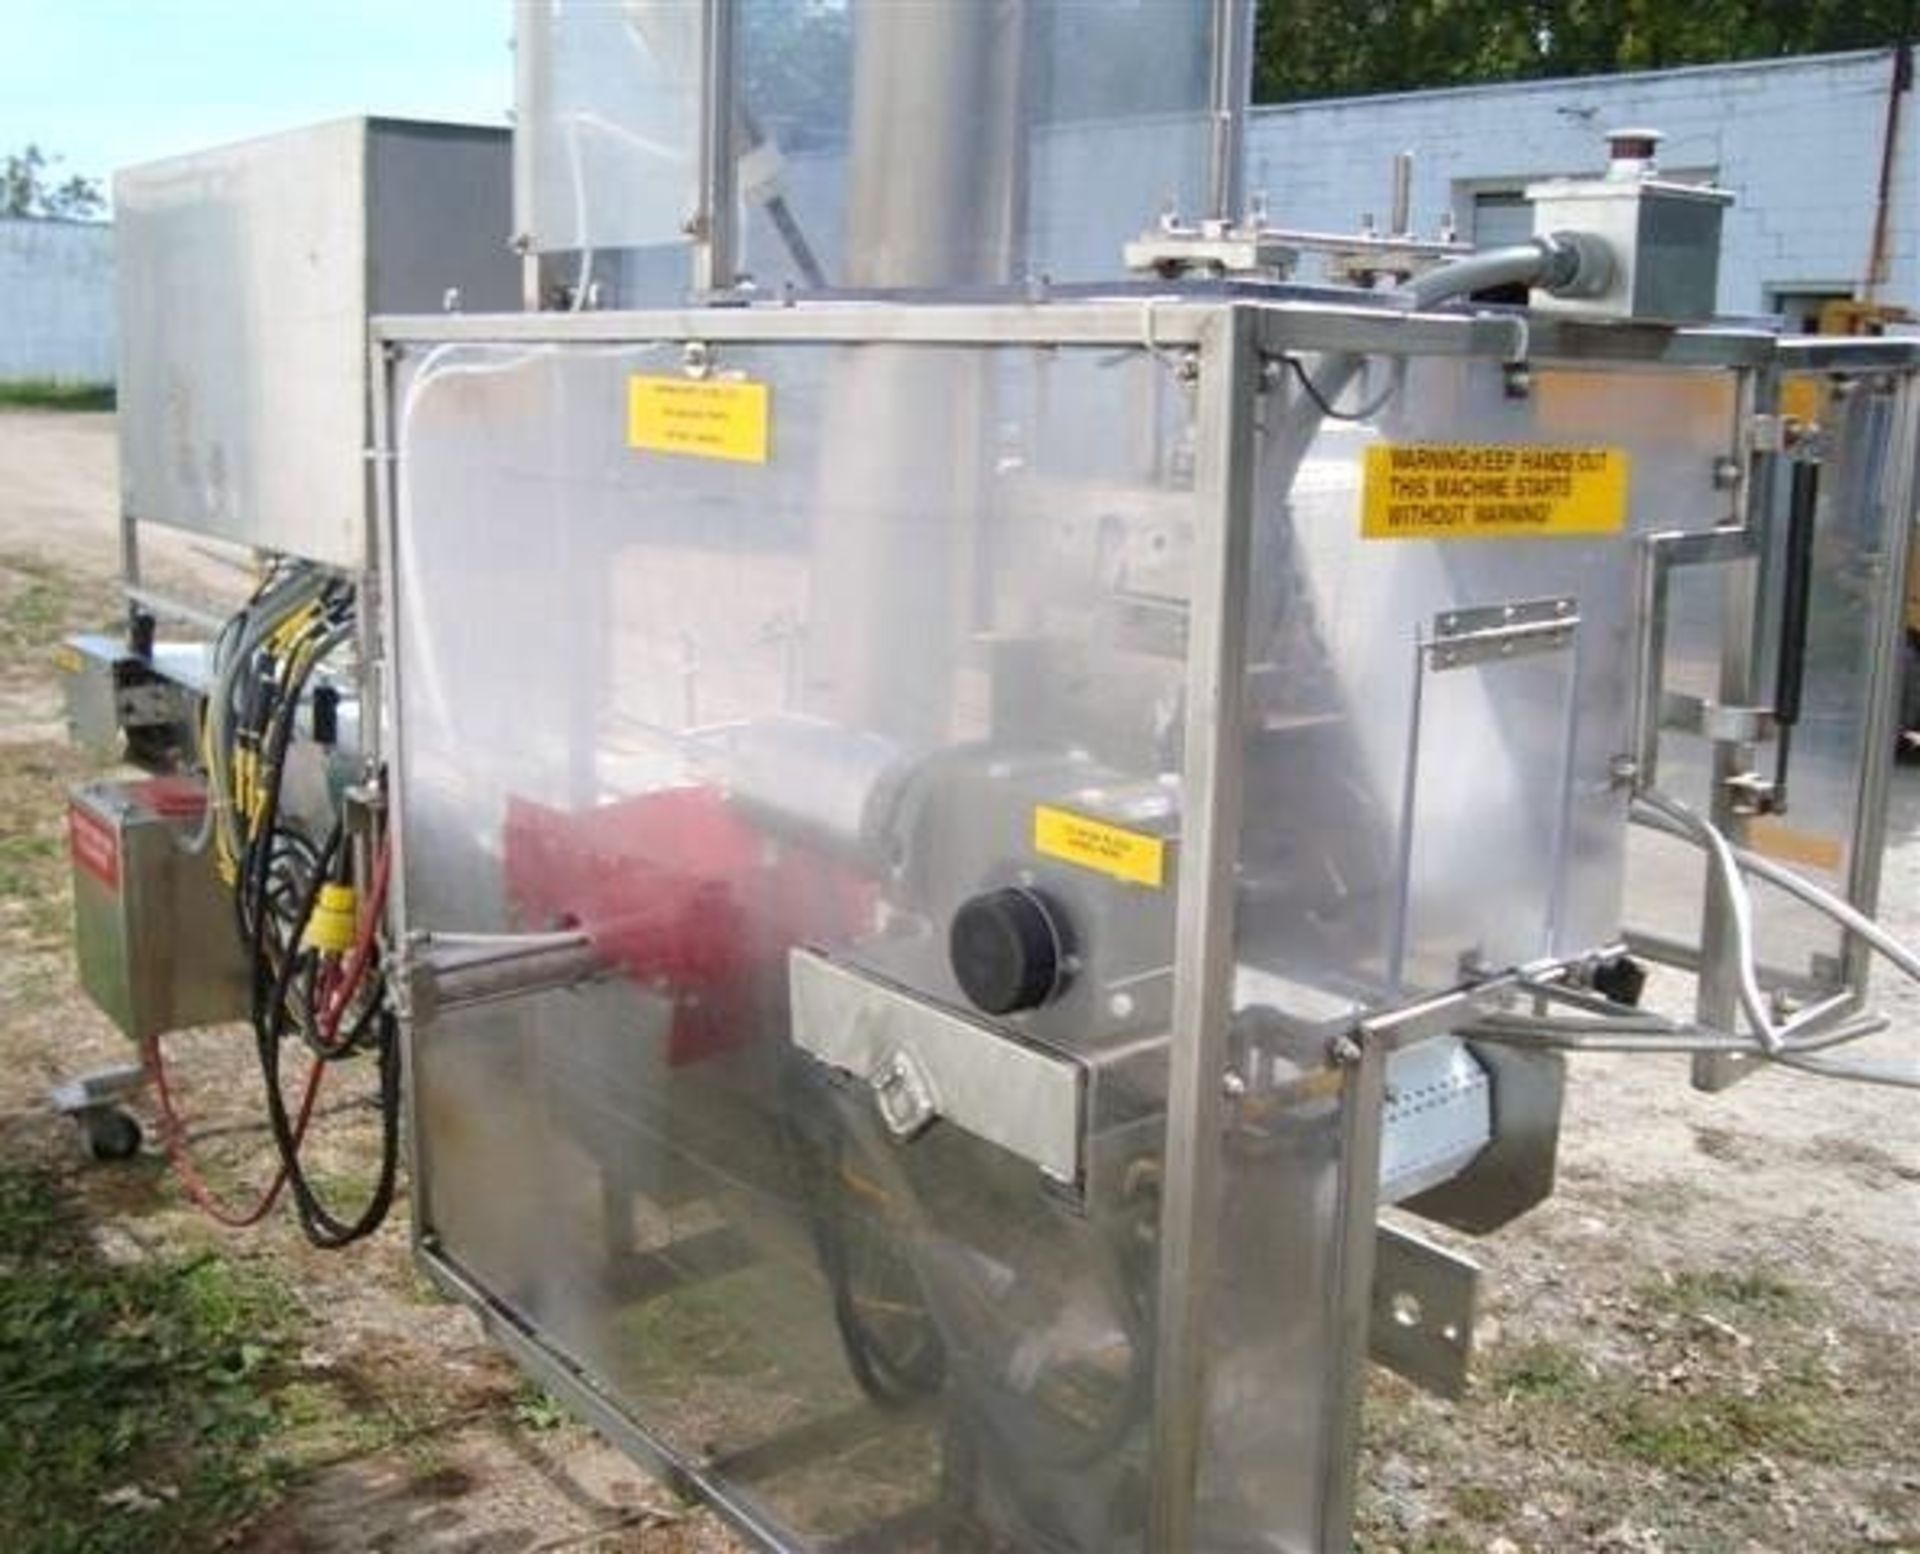 Food Process Systems S/S Sanitary Box Filler, Model 6000, S/N 145702 with Allen Bradley Ultra 3000 - Image 10 of 12